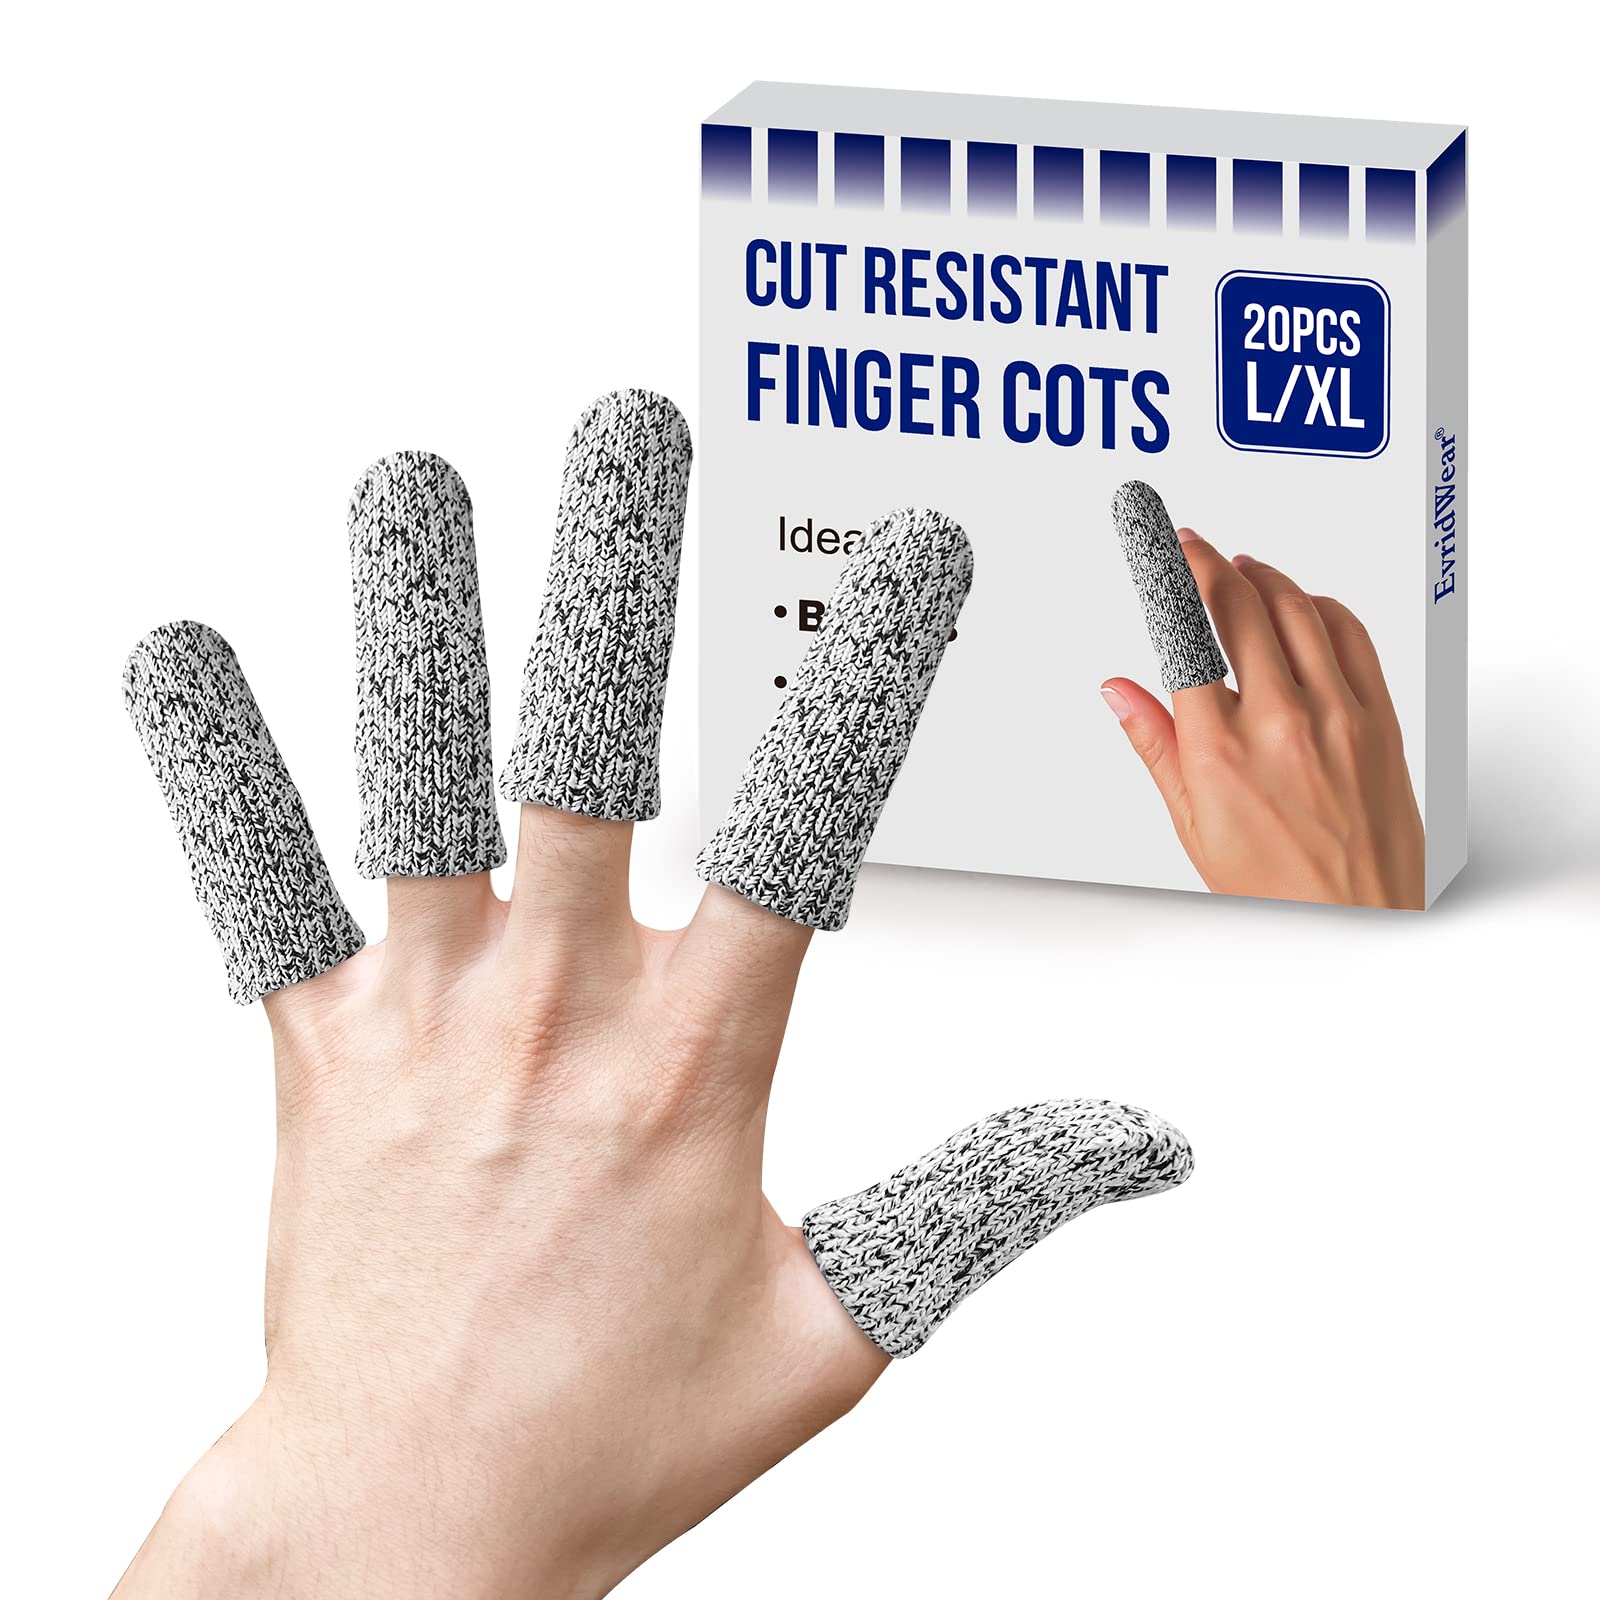 TIESOME 12 PCS Finger Cots Cut Resistant Protector, Finger Covers for Cuts  Reusable Gloves Life Extender Anti-Slip Cut Resistant Finger Protectors for